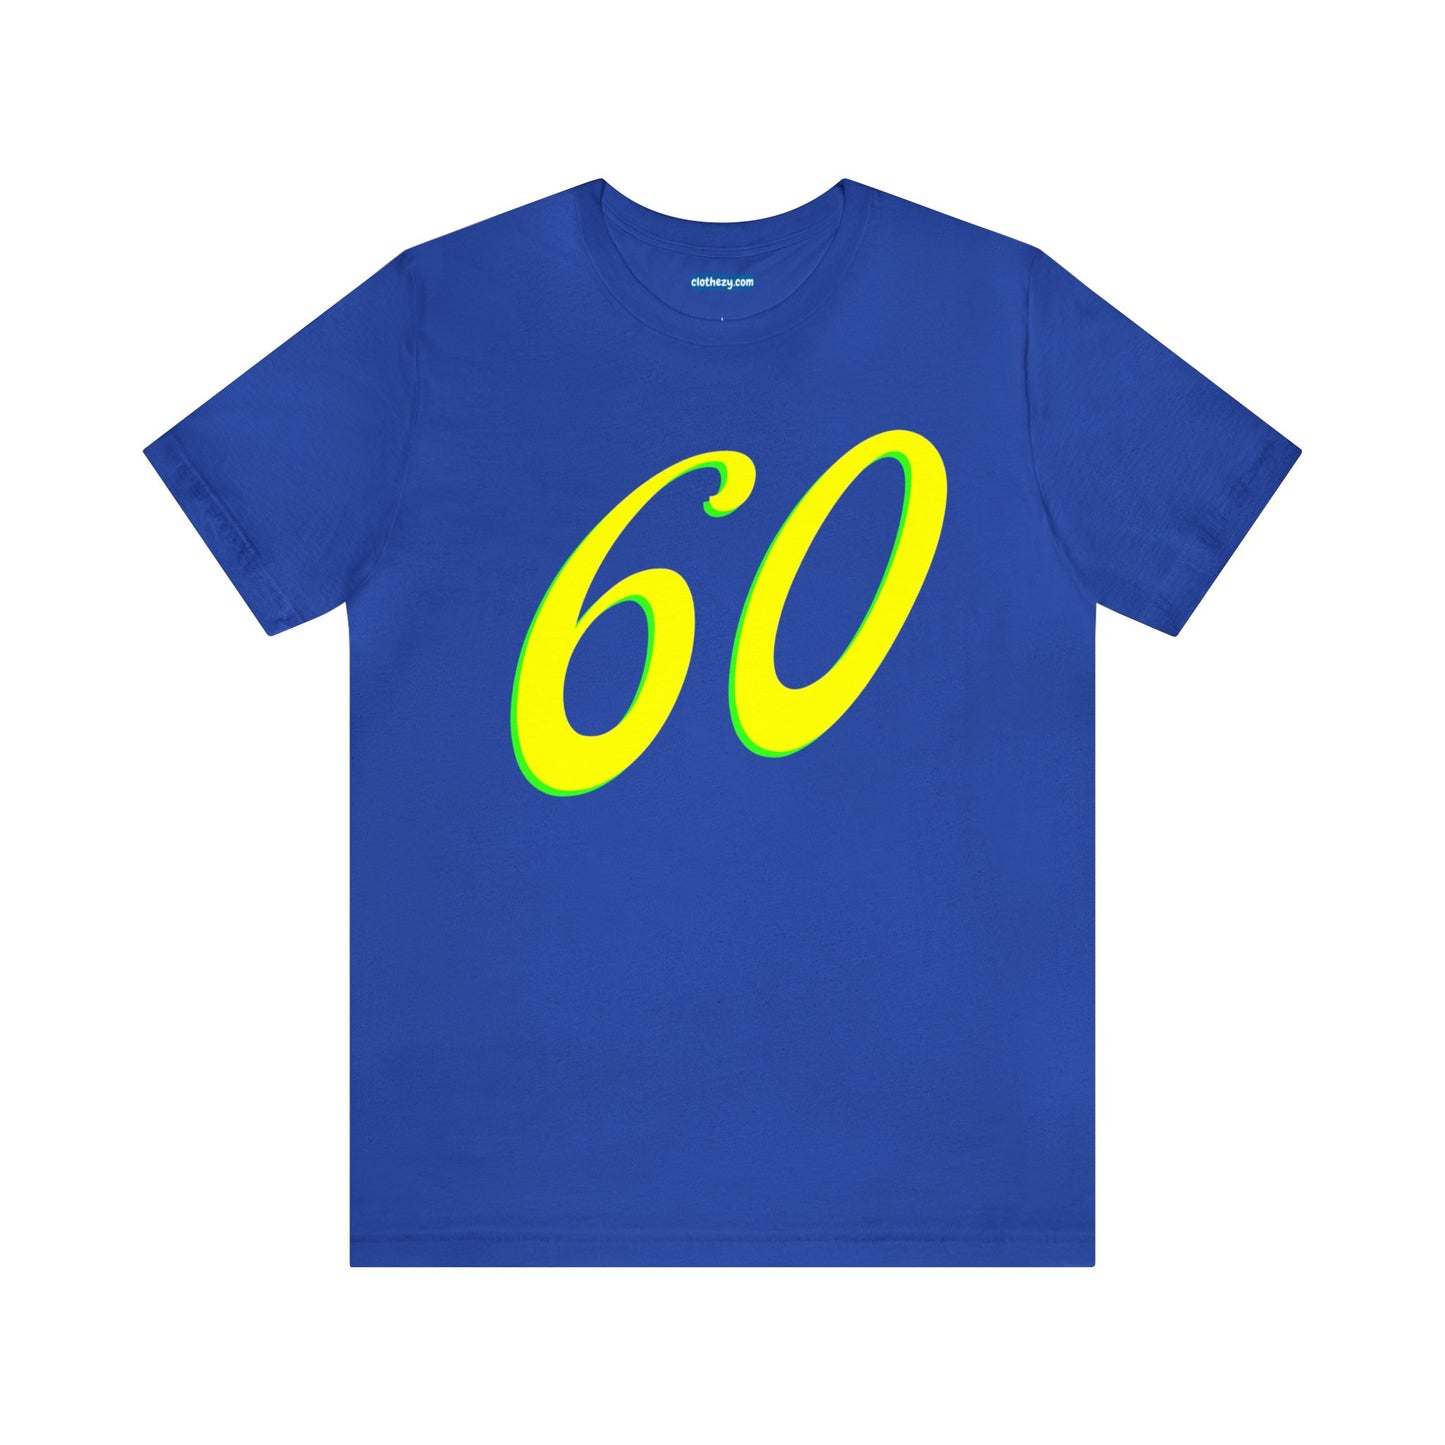 Number 60 Design - Soft Cotton Tee for birthdays and celebrations, Gift for friends and family, Multiple Options by clothezy.com in Royal Blue Size Small - Buy Now